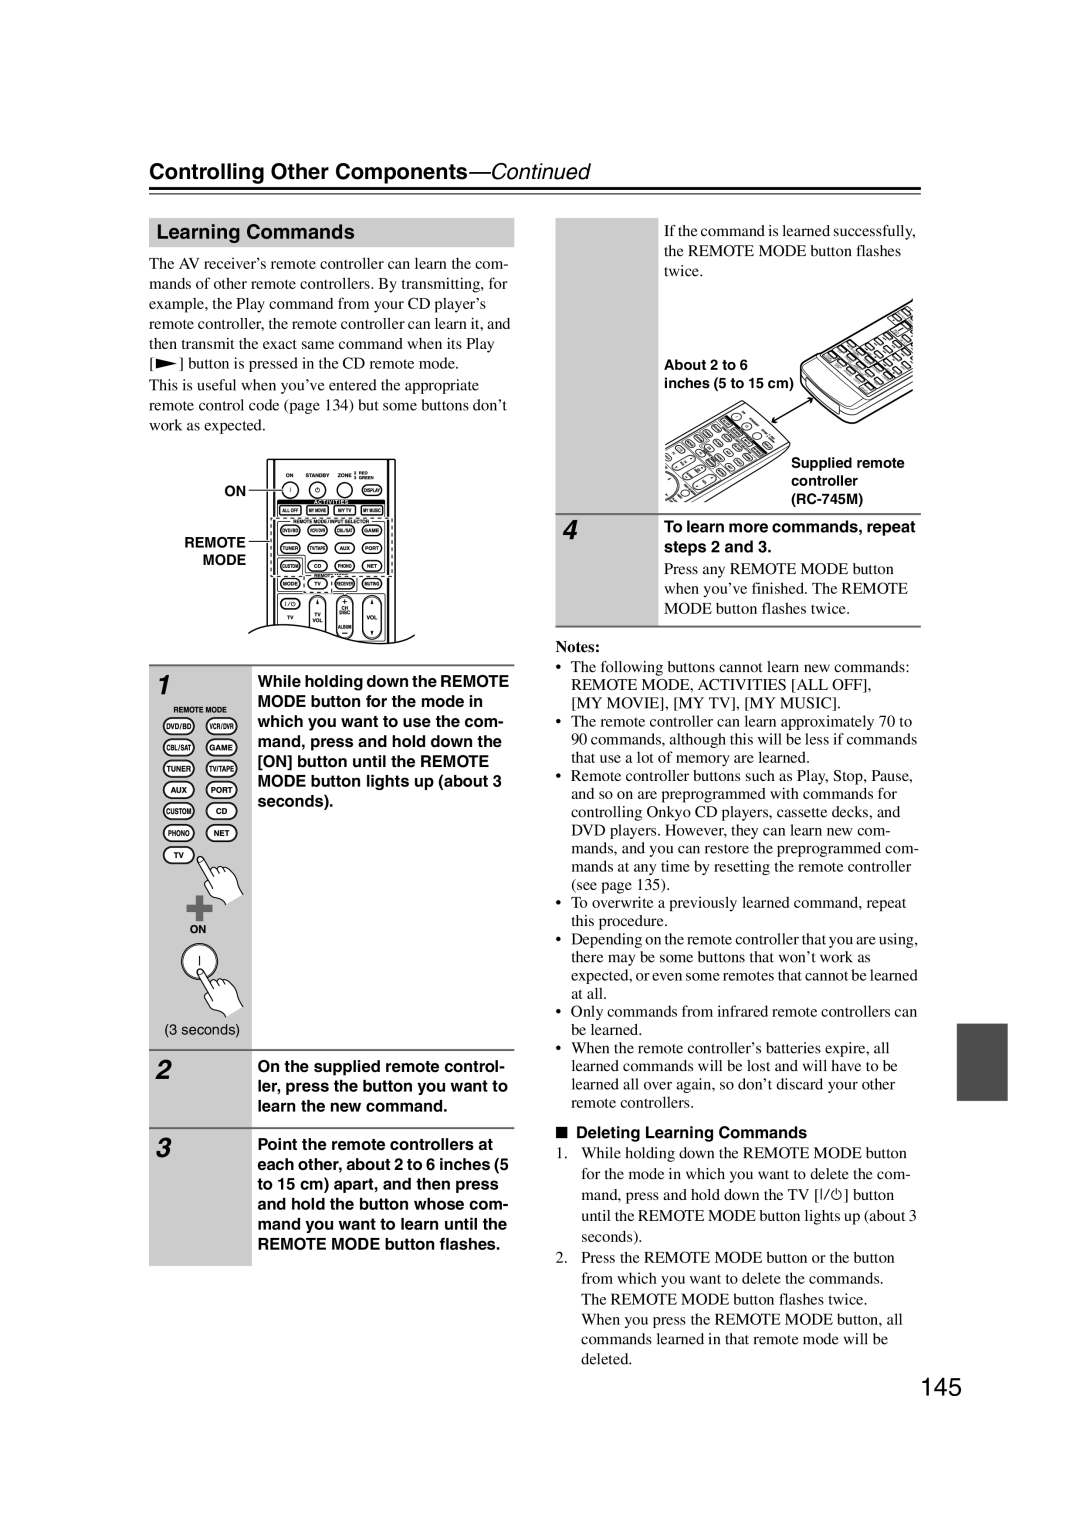 Onkyo TX-NR1007 instruction manual Learning Commands, Controlling Other Components—Continued 